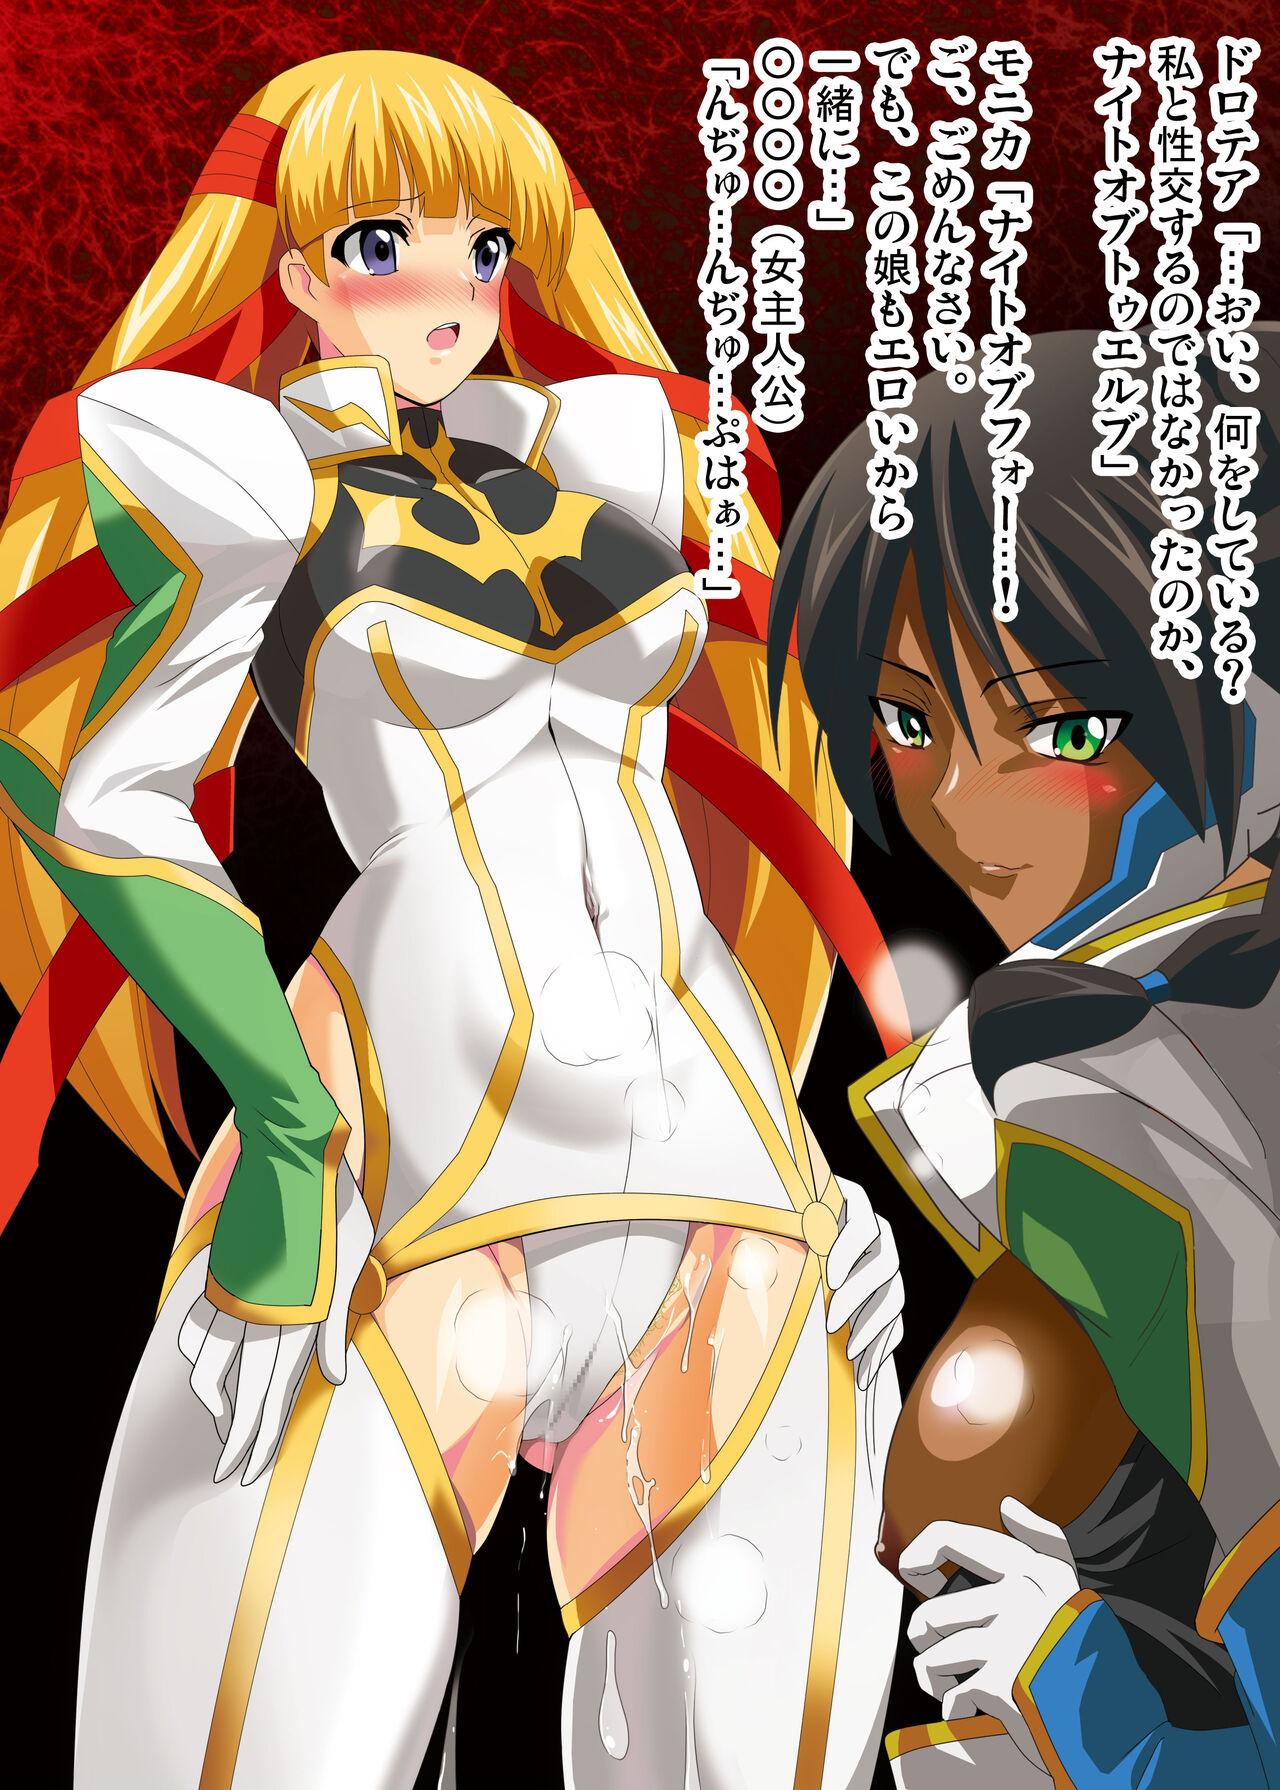 [Lezmoe! (Oyu no Kaori)]   [Brainwashing] Geass heroines completely corrupted by Empress Marianne [Evil fall] ~Knights, princesses, soldiers, and witches fall! (CODE GEASS: Lelouch of the Rebellion) 187